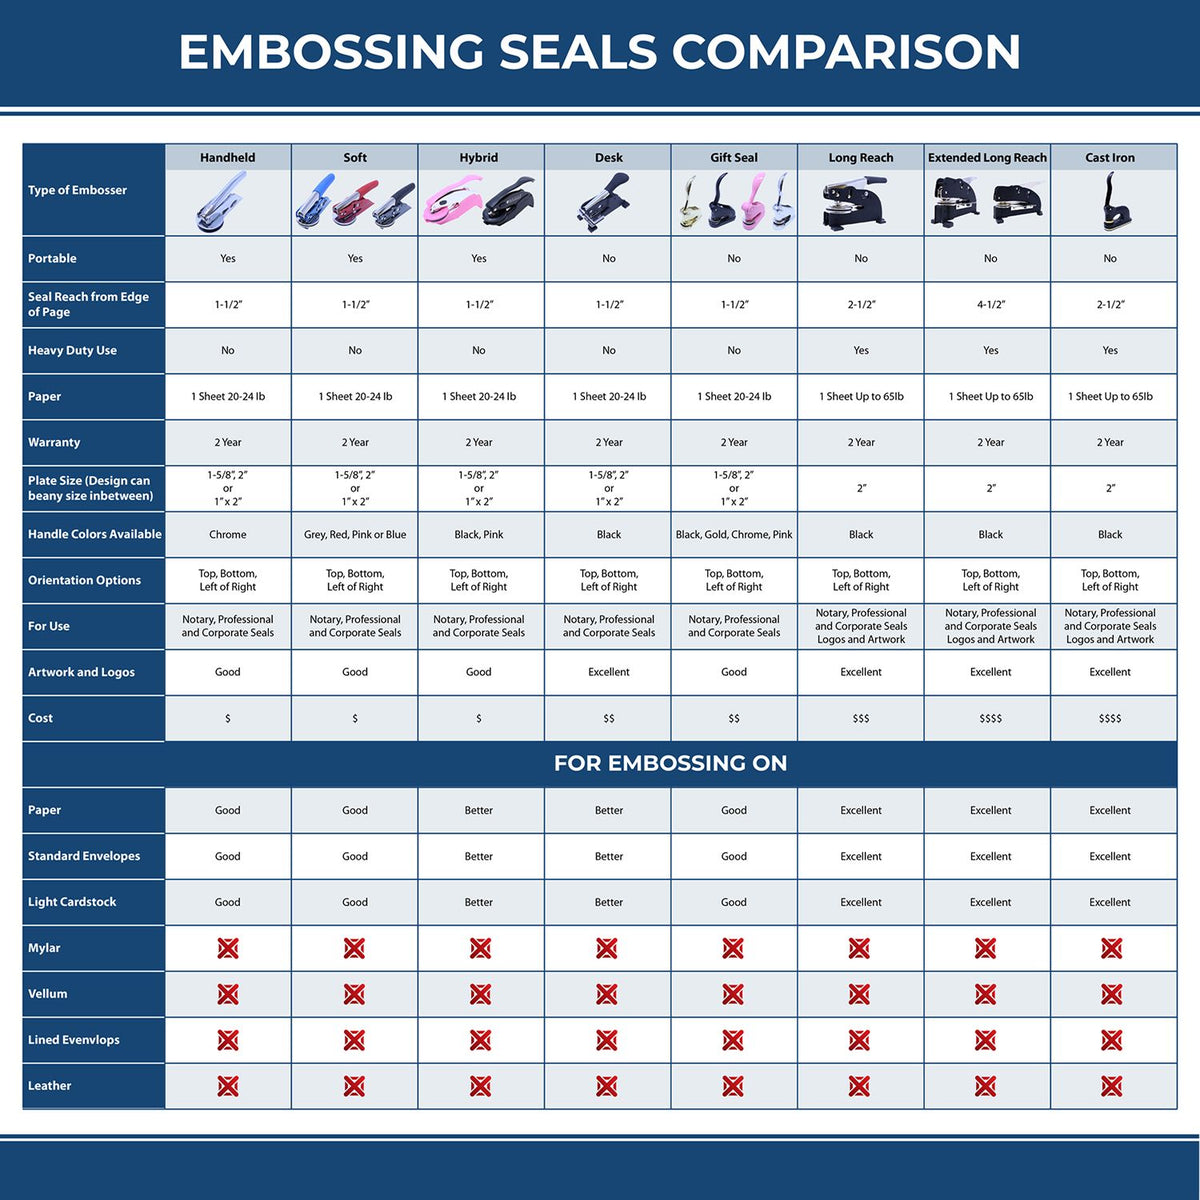 A comparison chart for the different types of mount models available for the Soft California Professional Engineer Seal.